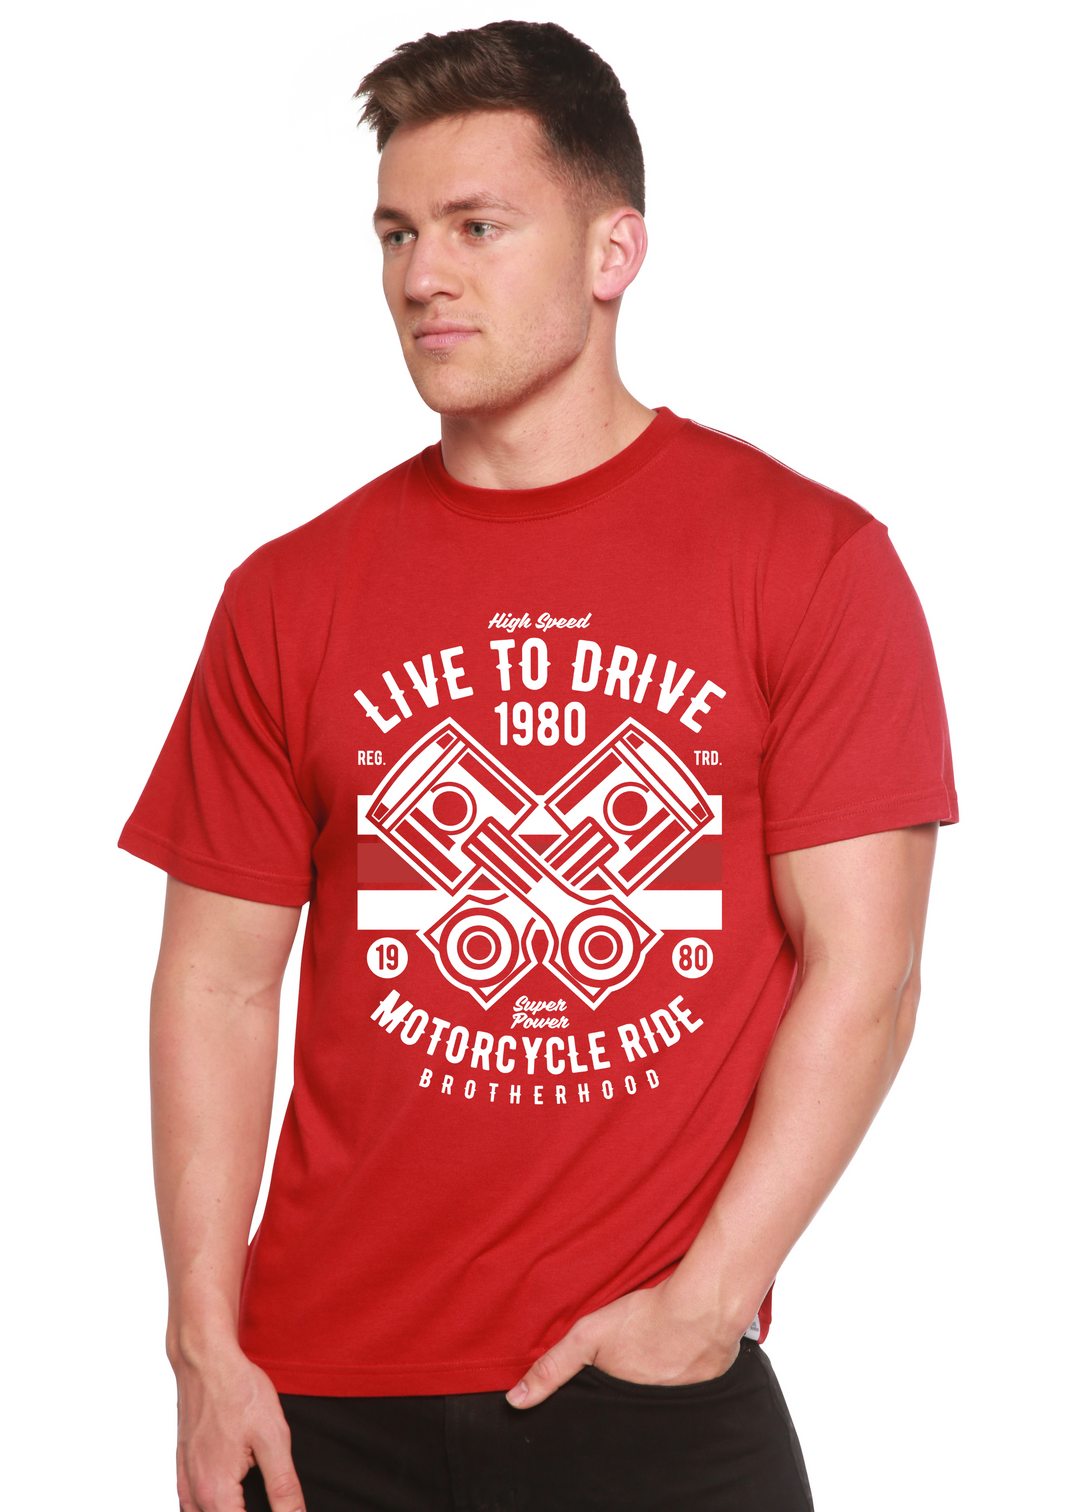 Live To Ride 1980 men's bamboo tshirt pompeian red